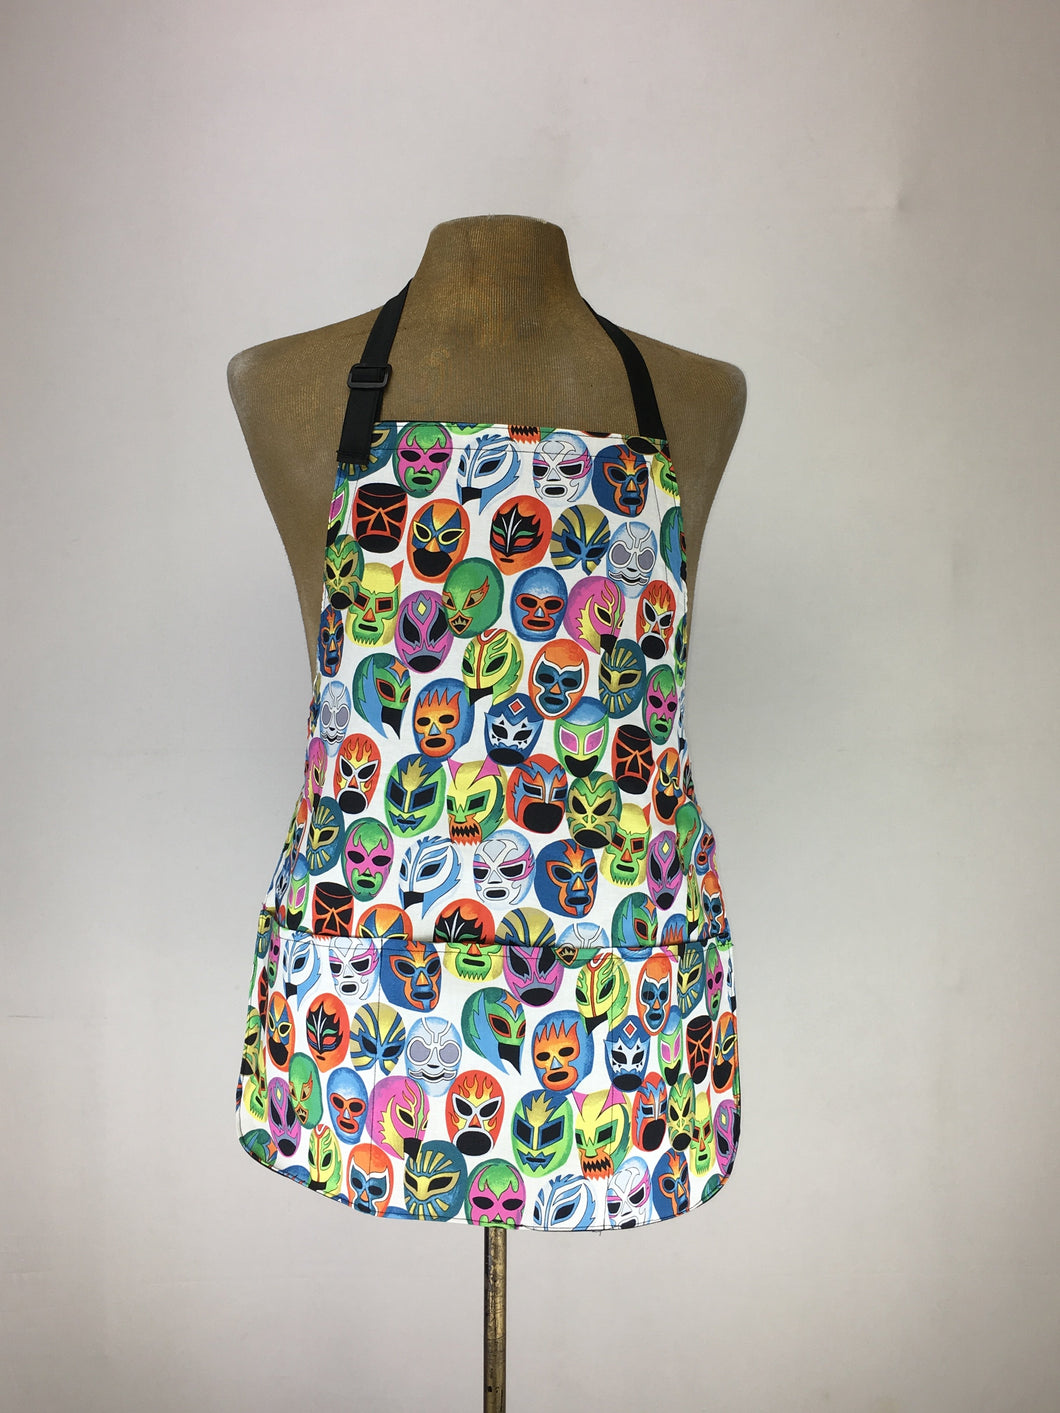 Lucha Libre MASCARITAS print handcrafted double sided apron